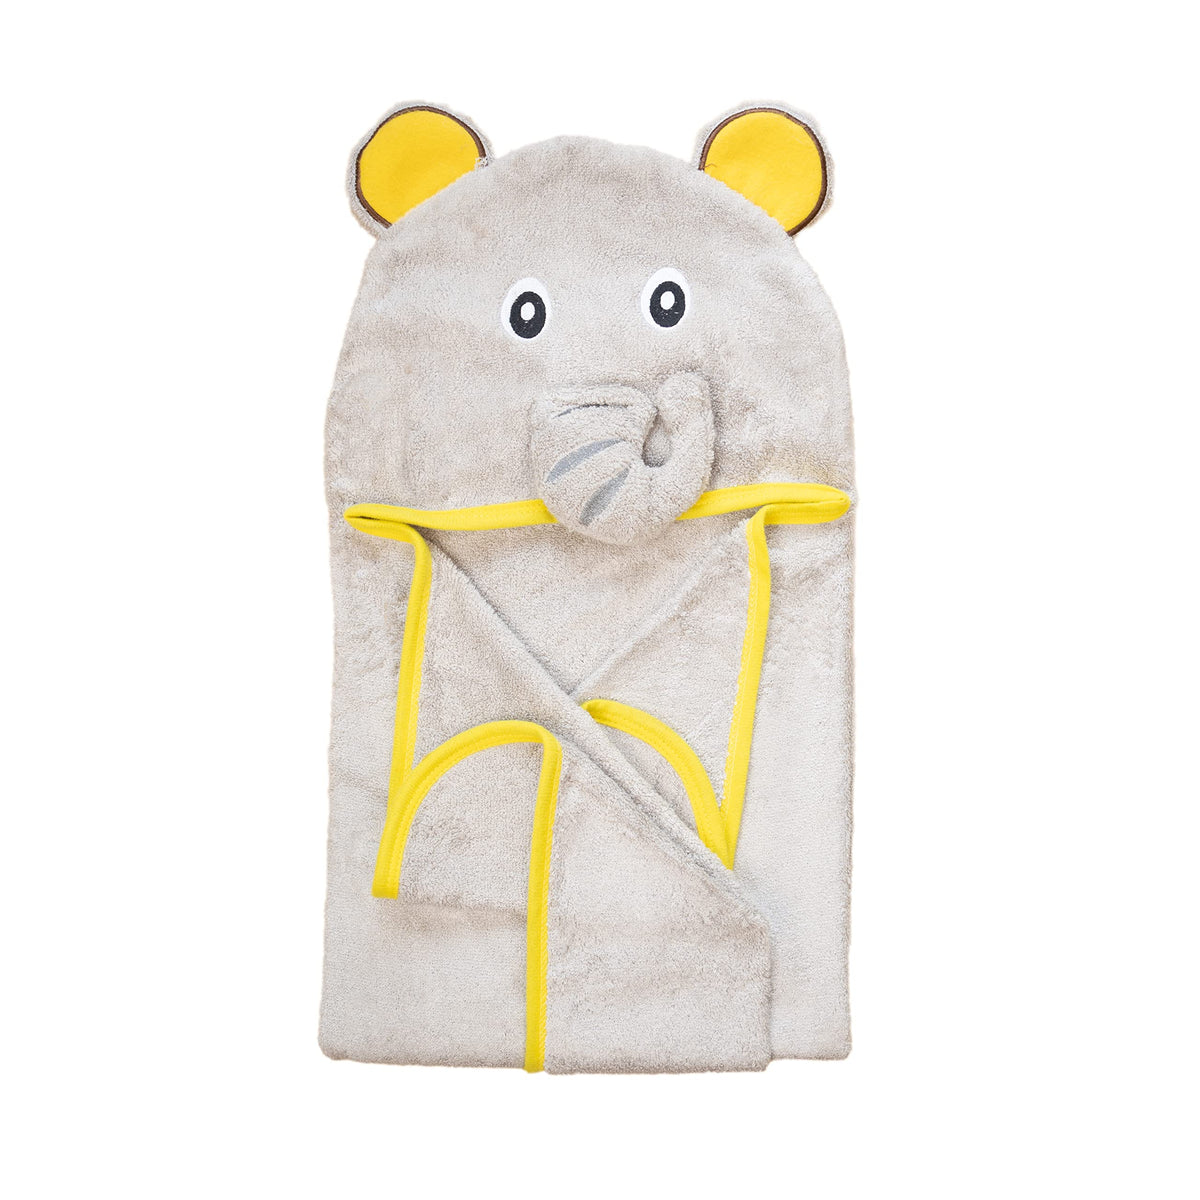 SNUGKINS Bamboo Hooded Baby Towel - Premium Soft Hooded Bath Towel for Baby, Toddler, Infant, for Boy and Girl - Ellie the Elephant